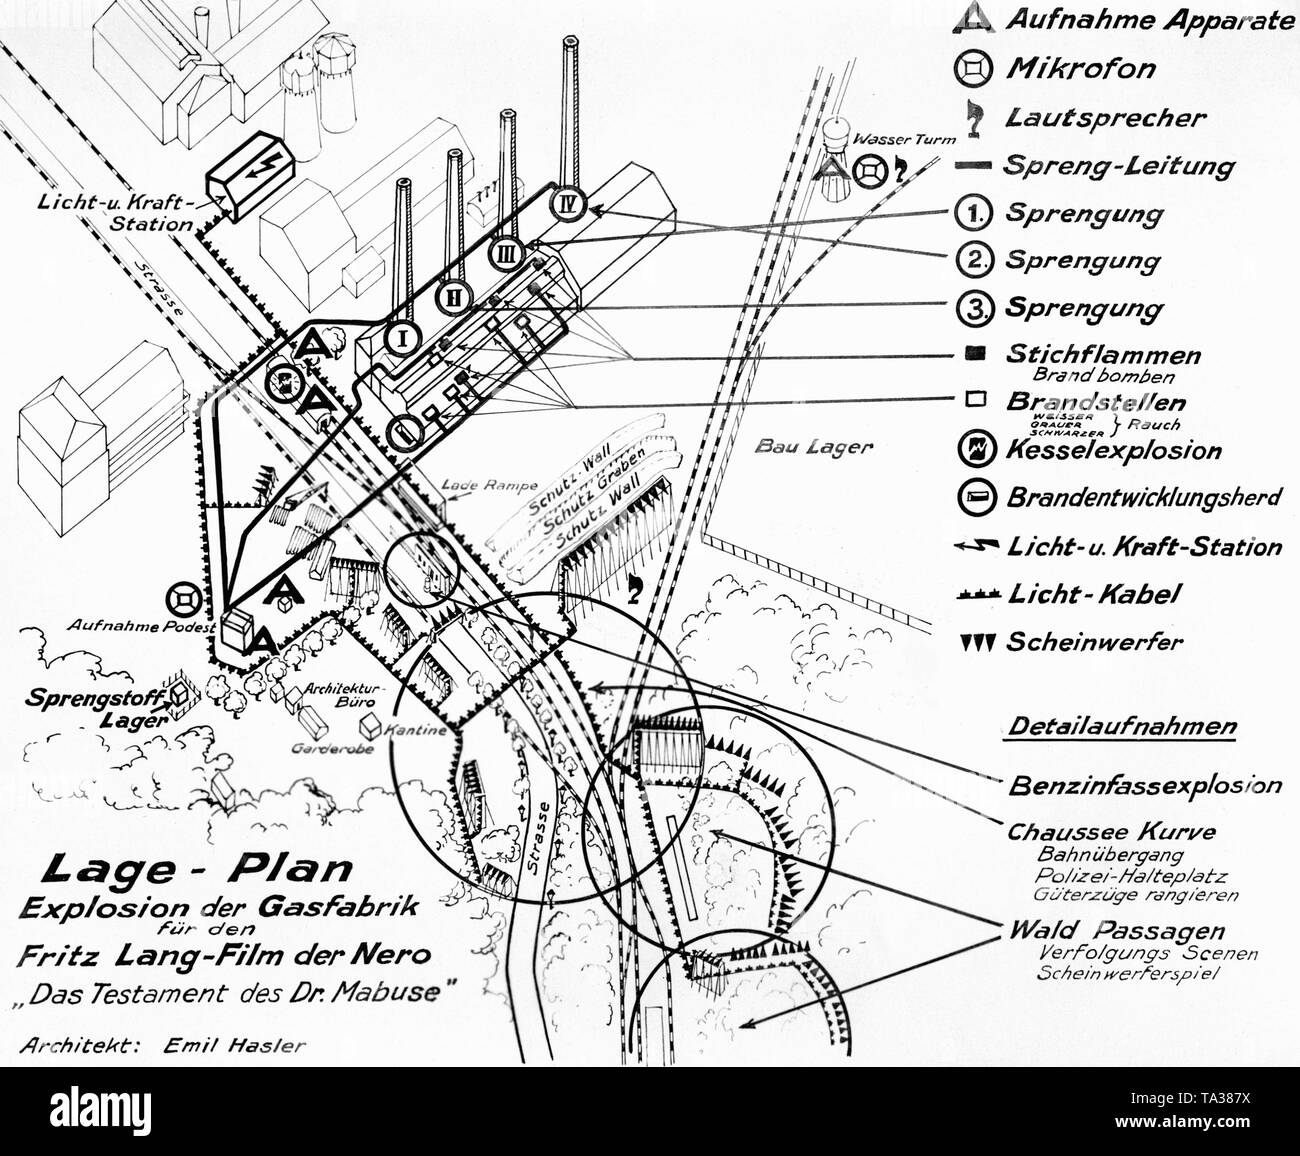 Site map for the explosion of the gas factory for the movie 'The Testament of Dr. Mabuse', by architect Emil Hasler and directed by Fritz Lang. The script was based on a novel by Nobert Jacques. The film was banned by the Nazis because of its political subject. Stock Photo